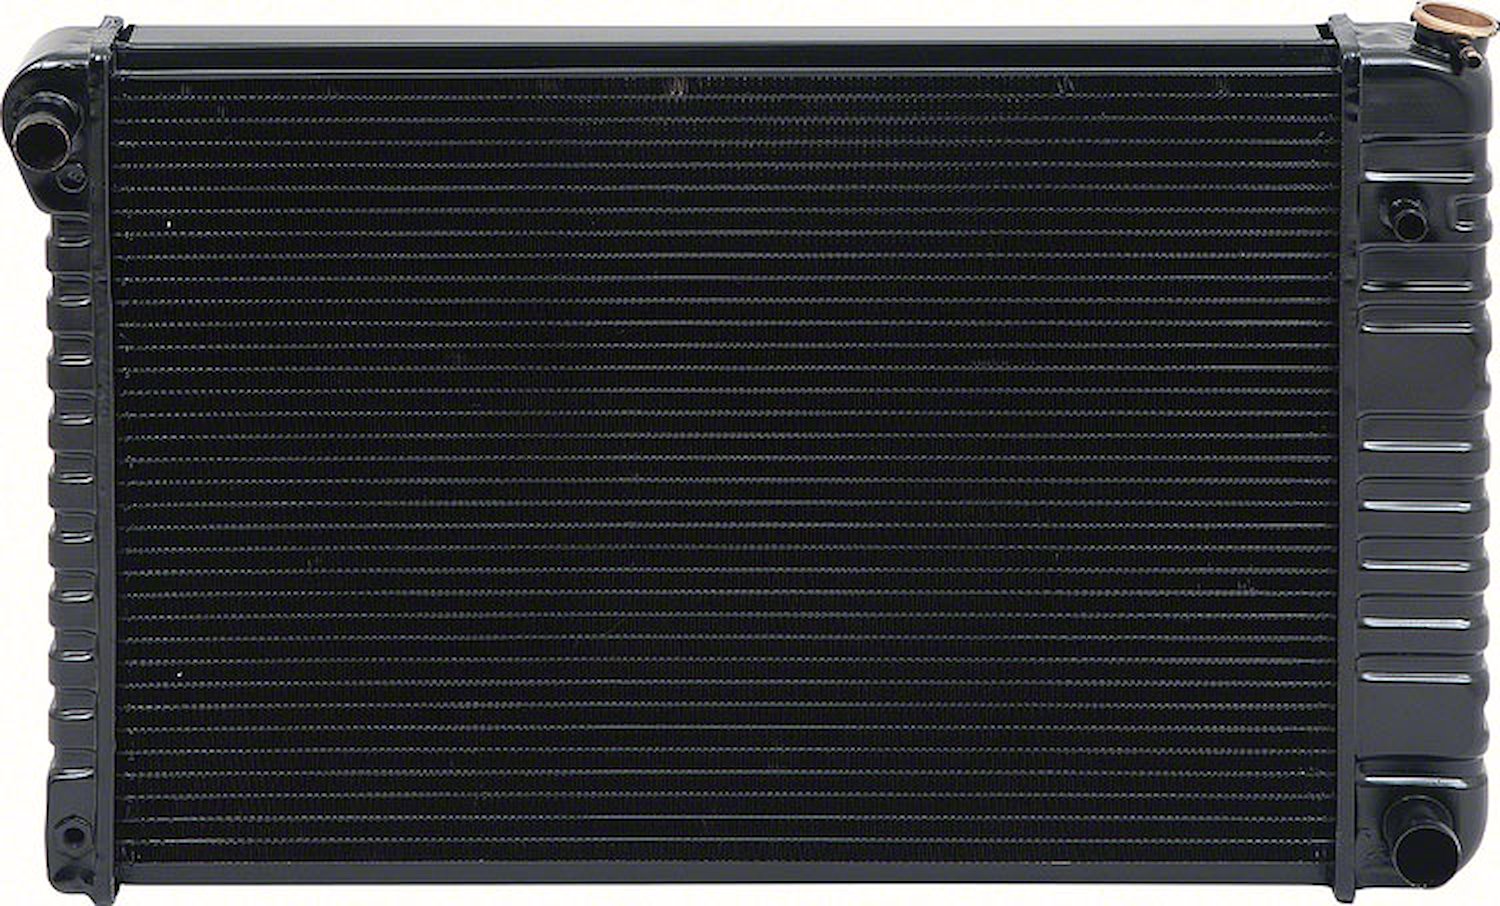 CRD1783S Radiator 1978-80 Chevrolet Truck L6 With MT 4 Row Copper/Brass (17" x 28-3/8" x 2-5/8" Core)